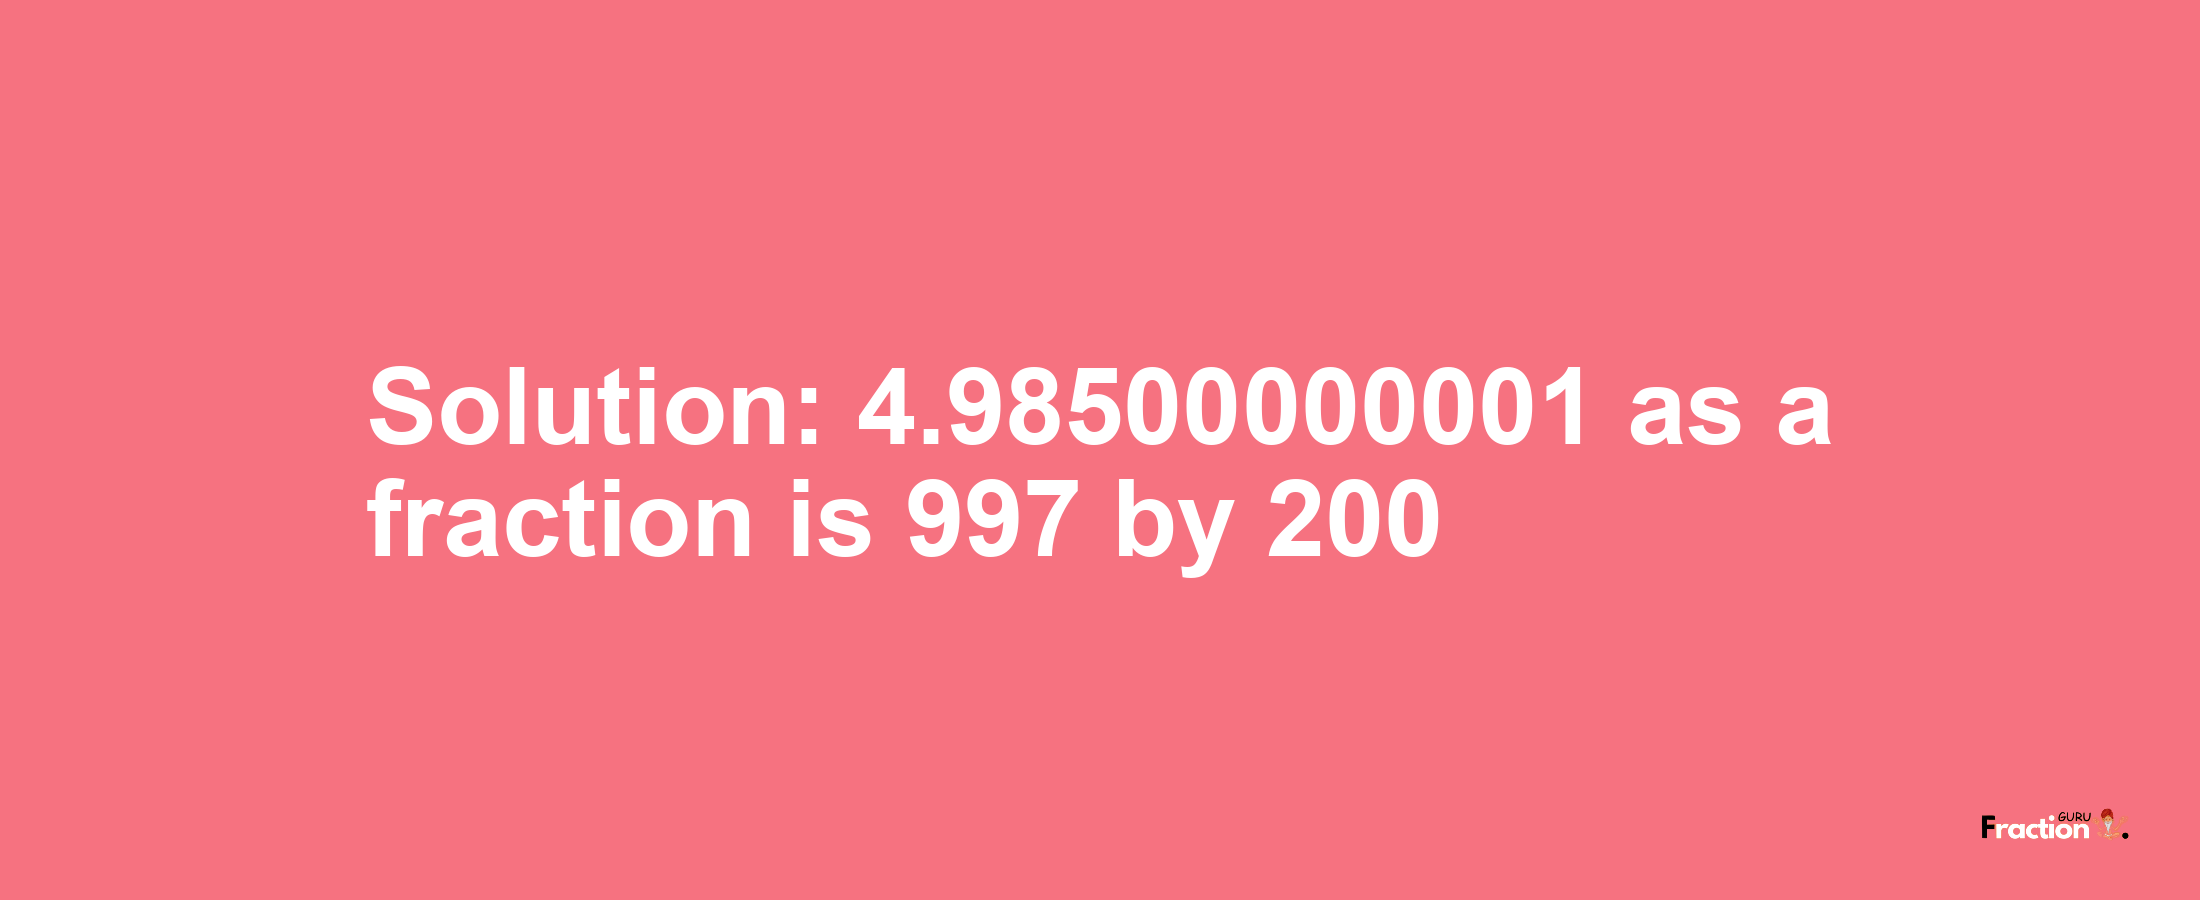 Solution:4.98500000001 as a fraction is 997/200